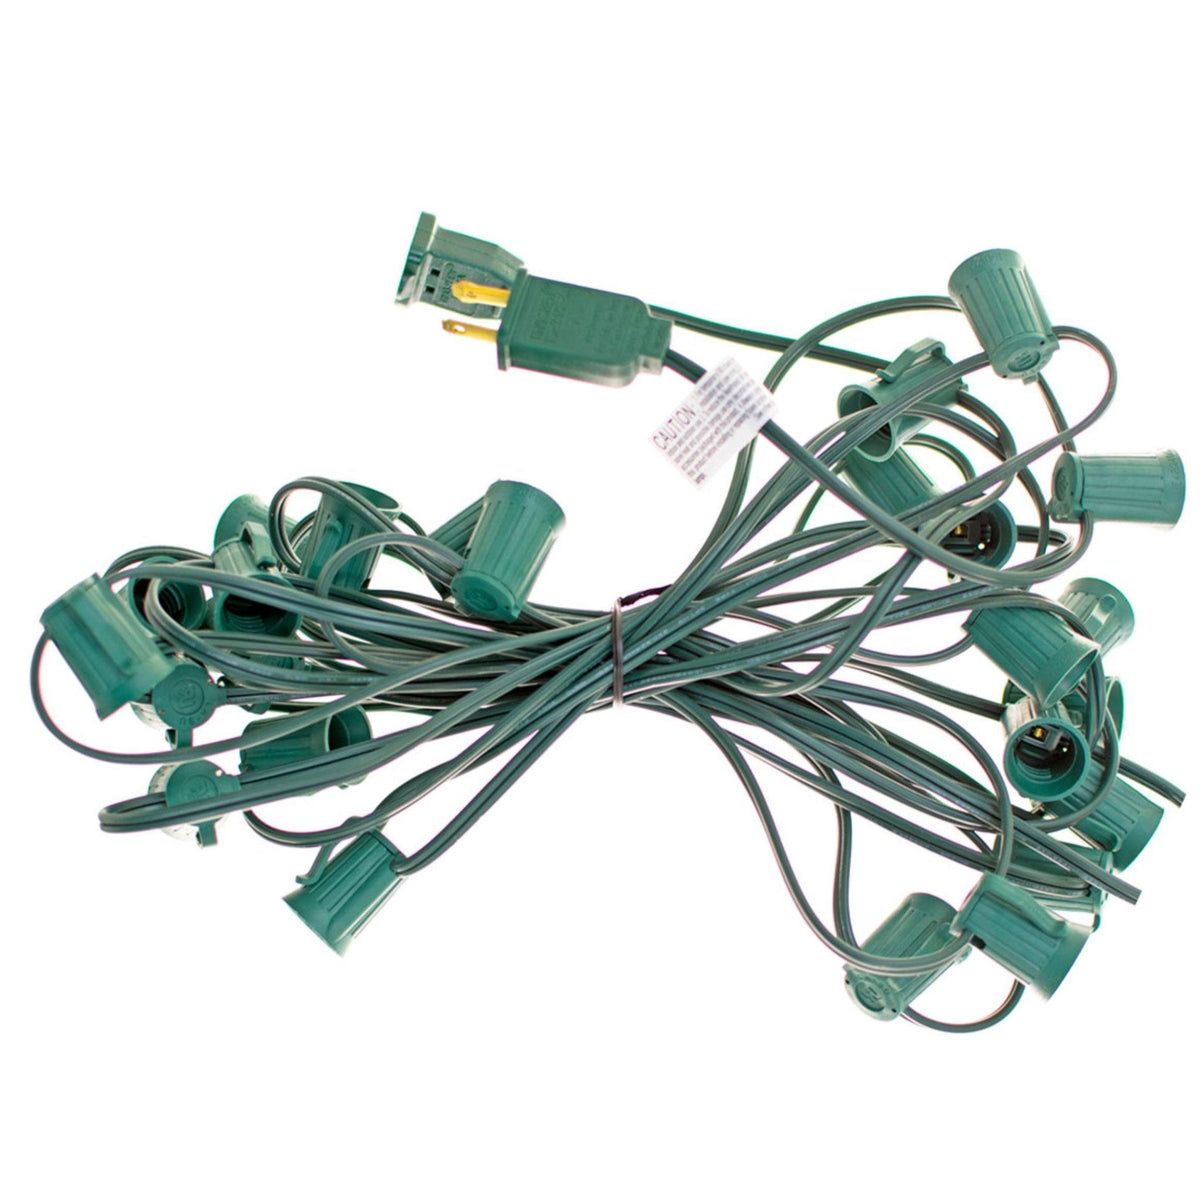 25FT Clear Magnetic Outdoor String Lighting Set!    Choose between Twinkling Bulbs and Steady Burning Bulbs, White Wire or Green Wire Cords, C7 & C9 Size available.  Shop now at leedisplay.com